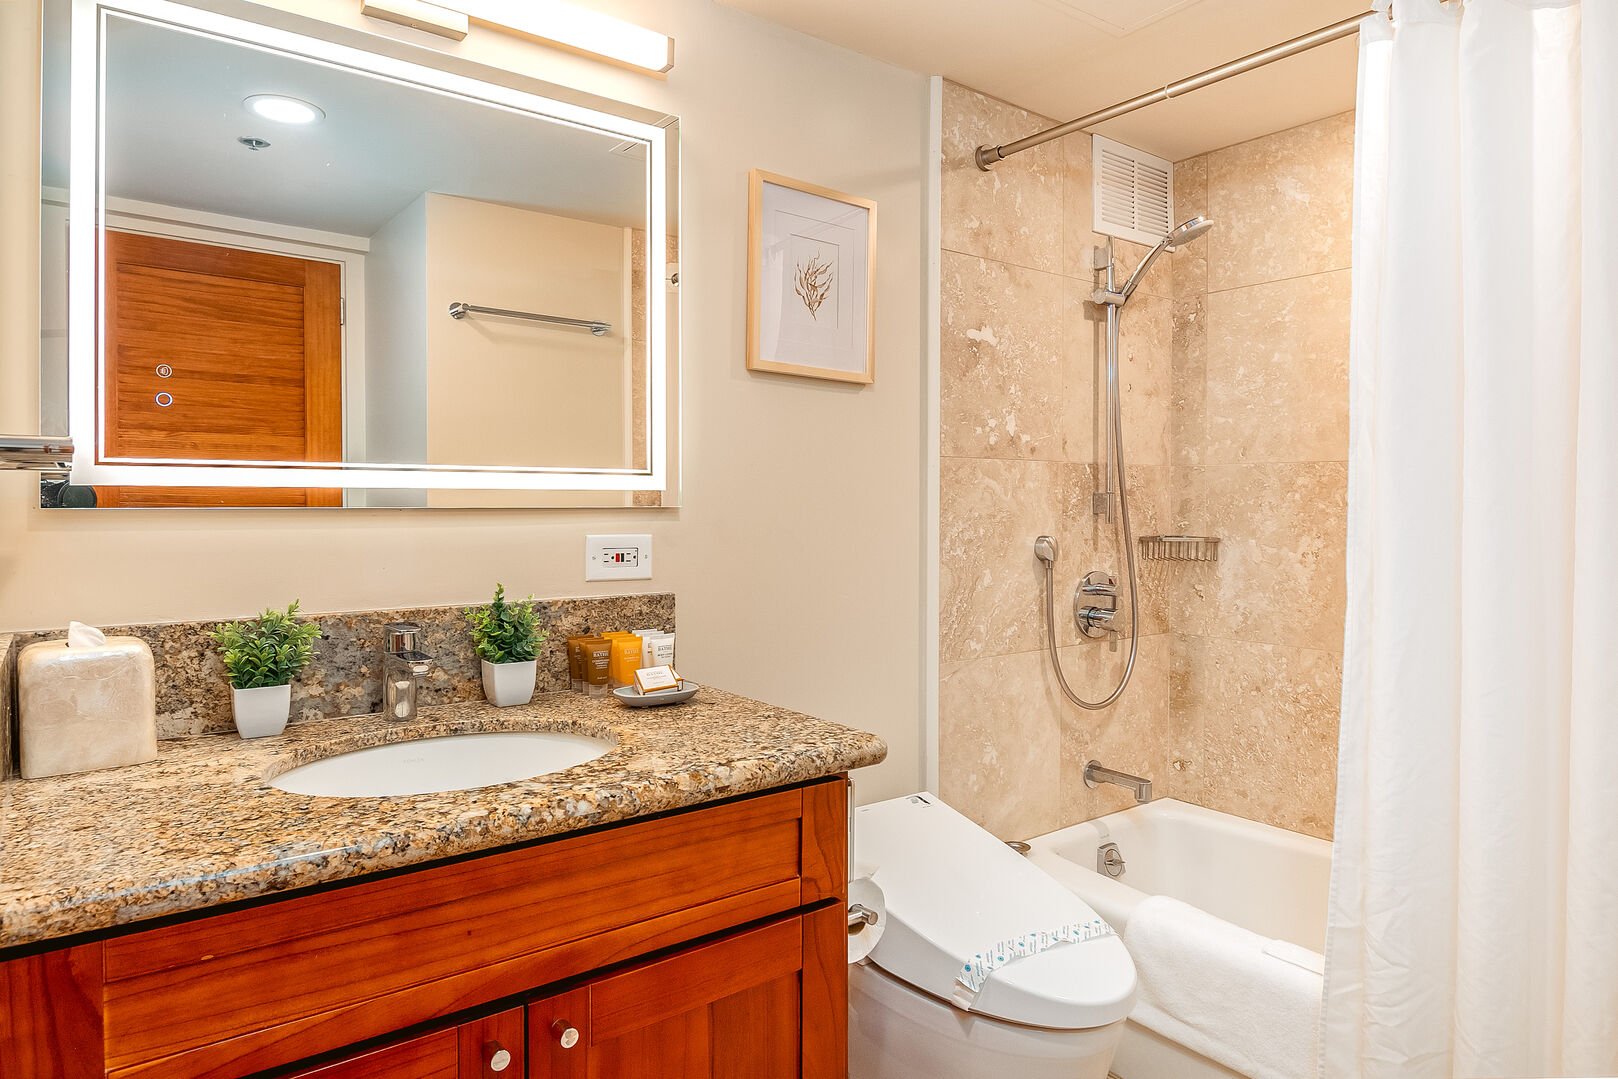 The master bedroom has a bathroom with tub and shower combo, and a vanity with cabinet.